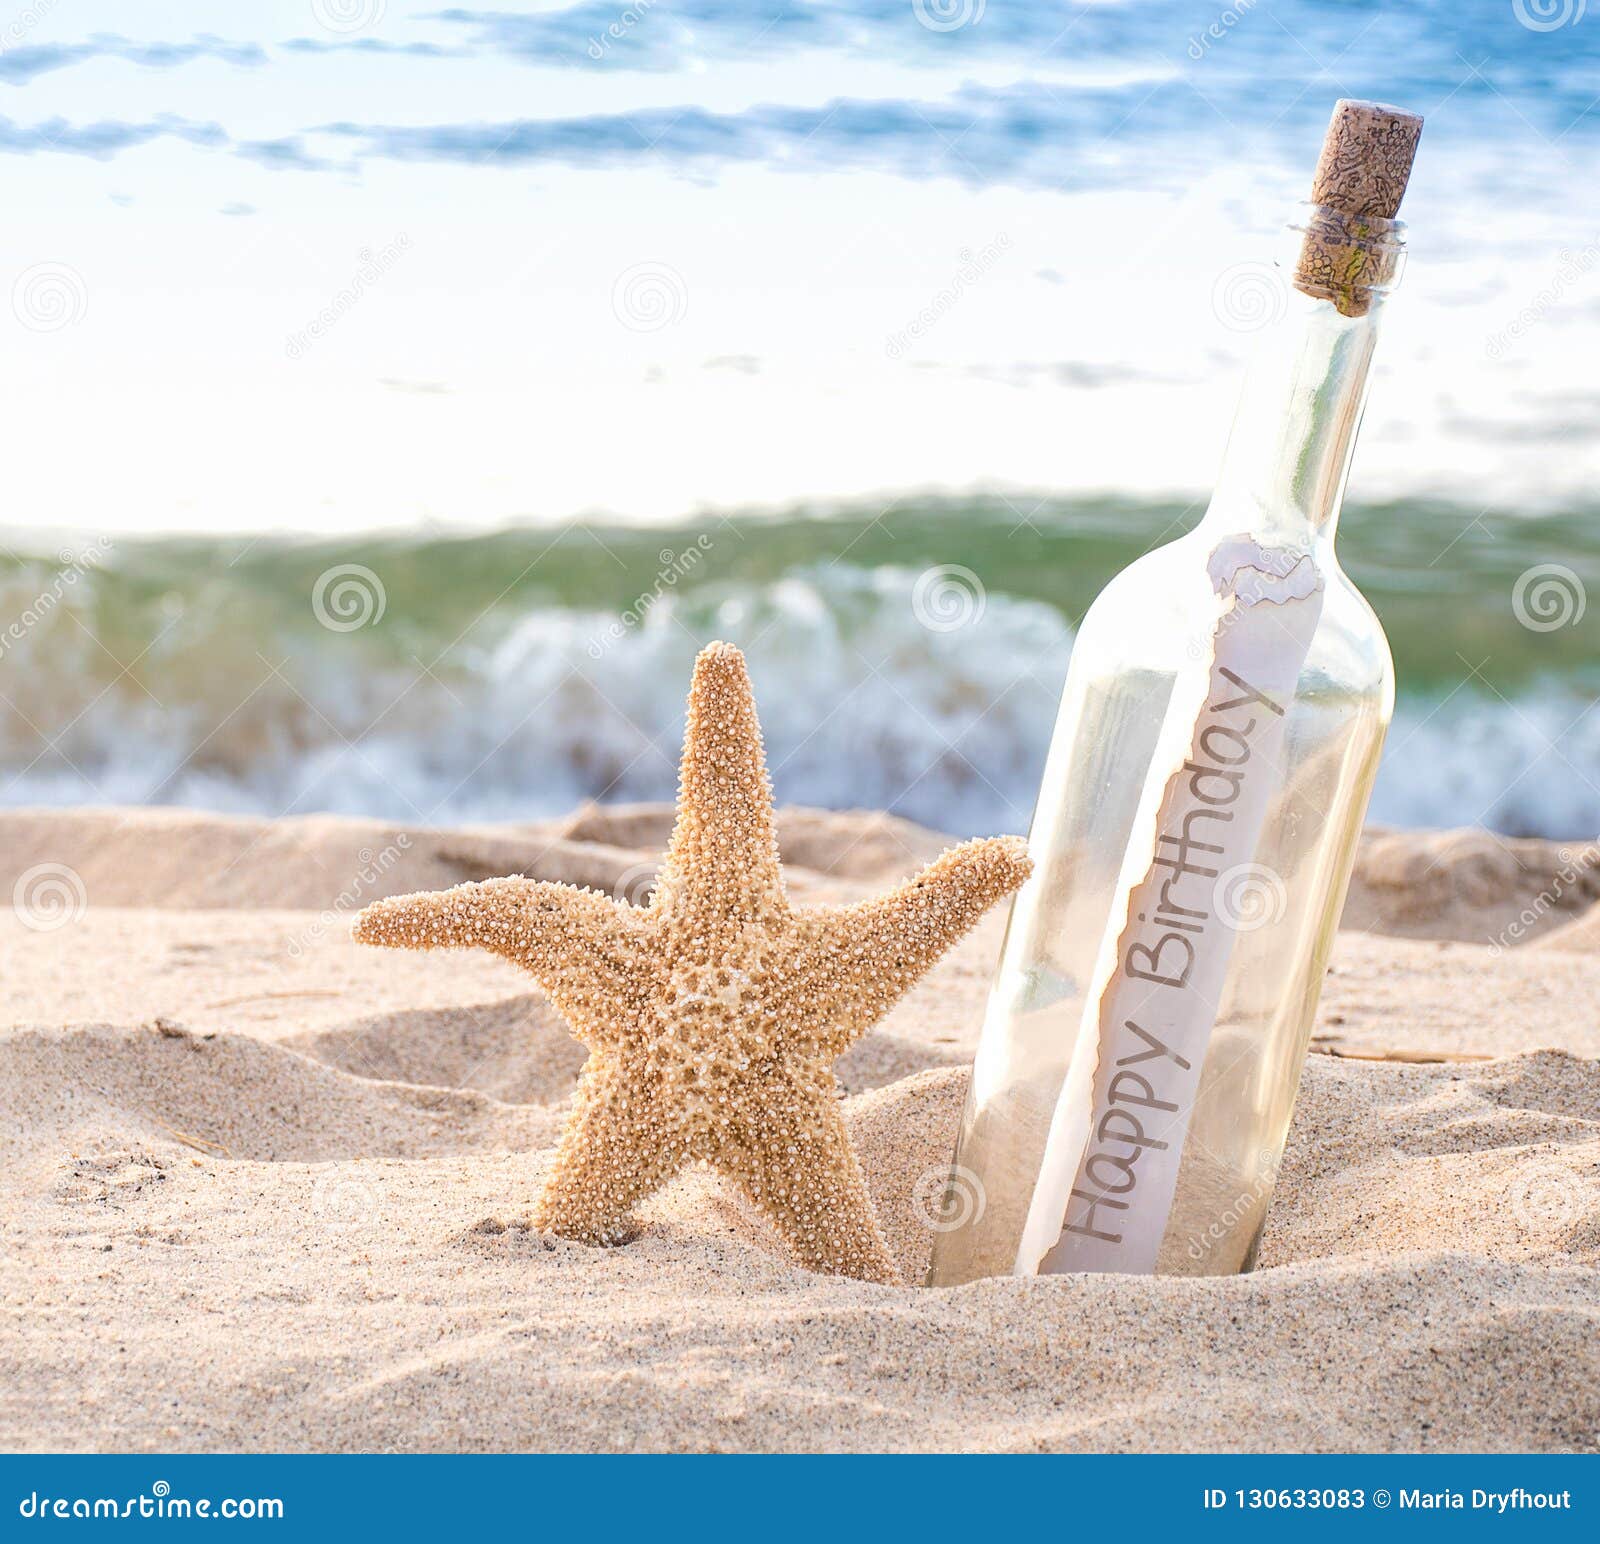 Starfish With Birthday Message In Bottle Stock Image Image Of Glass Wave